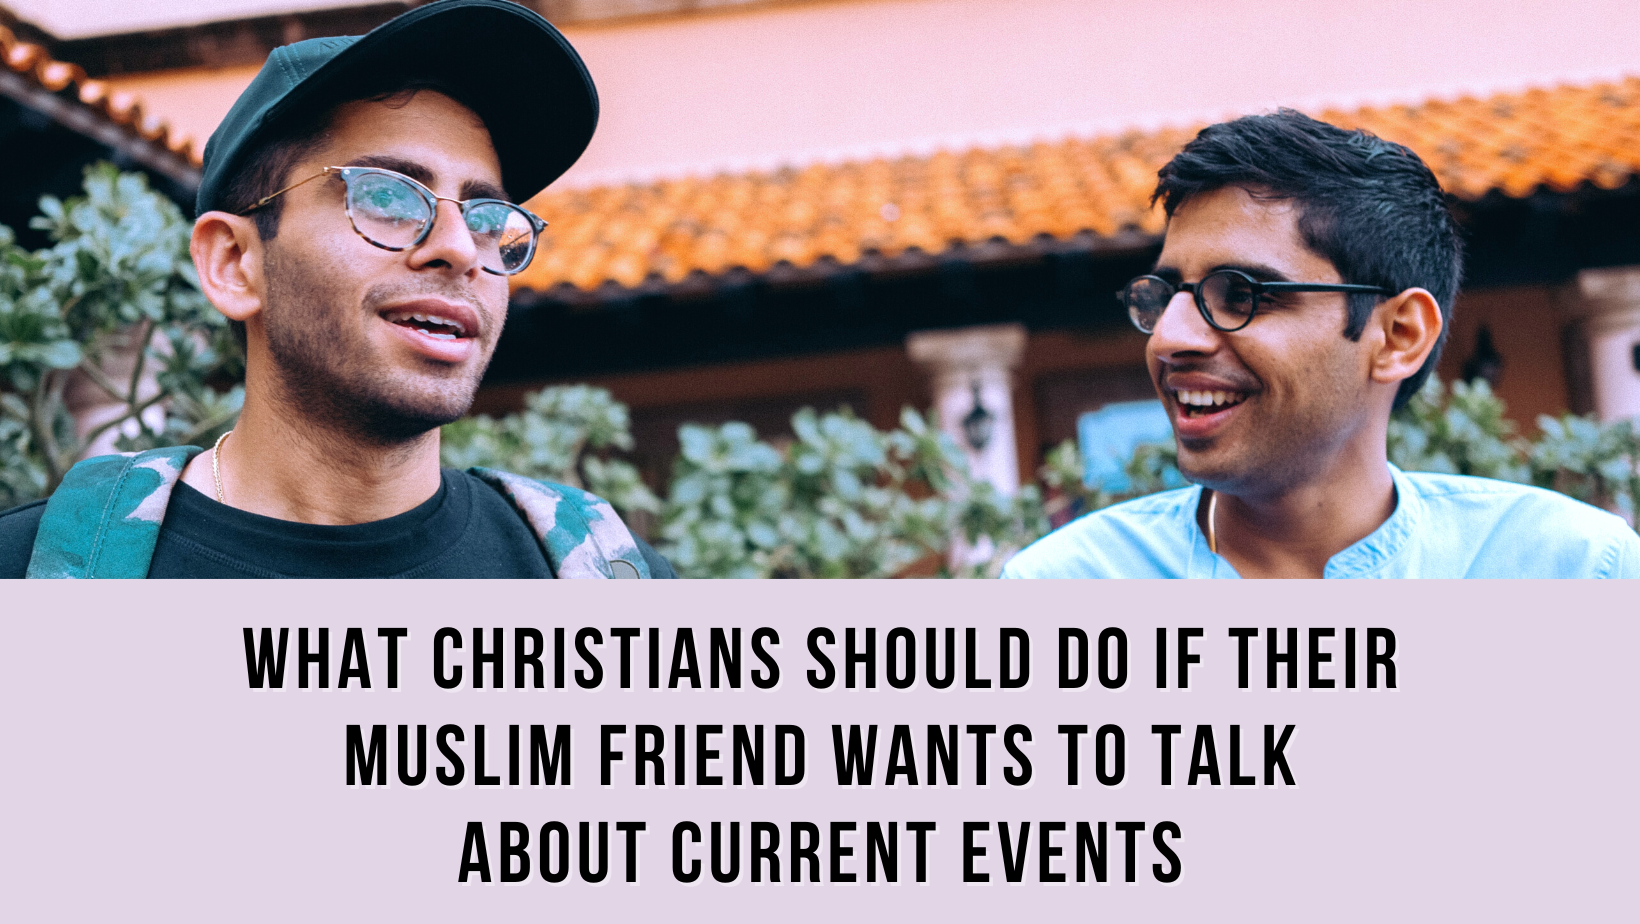 What Christians should do if their Muslim friend wants to talk about current events